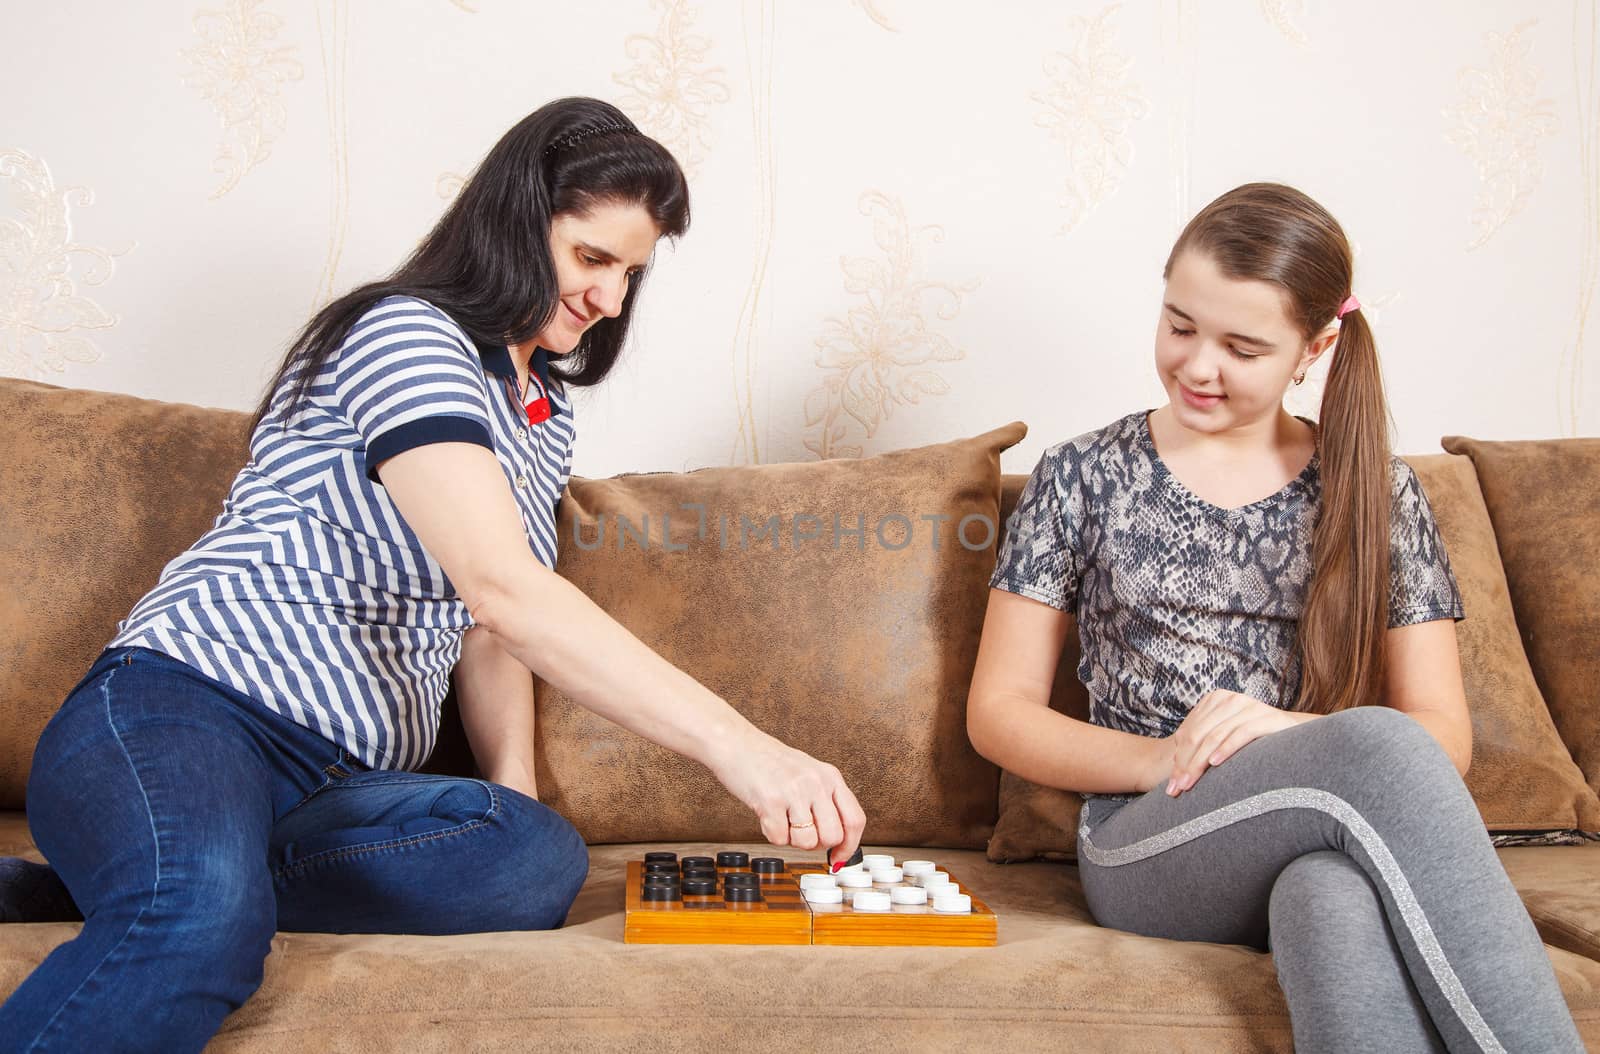 mom and daughter play checkers while sitting on a sofa at home. coronavirus quarantine.